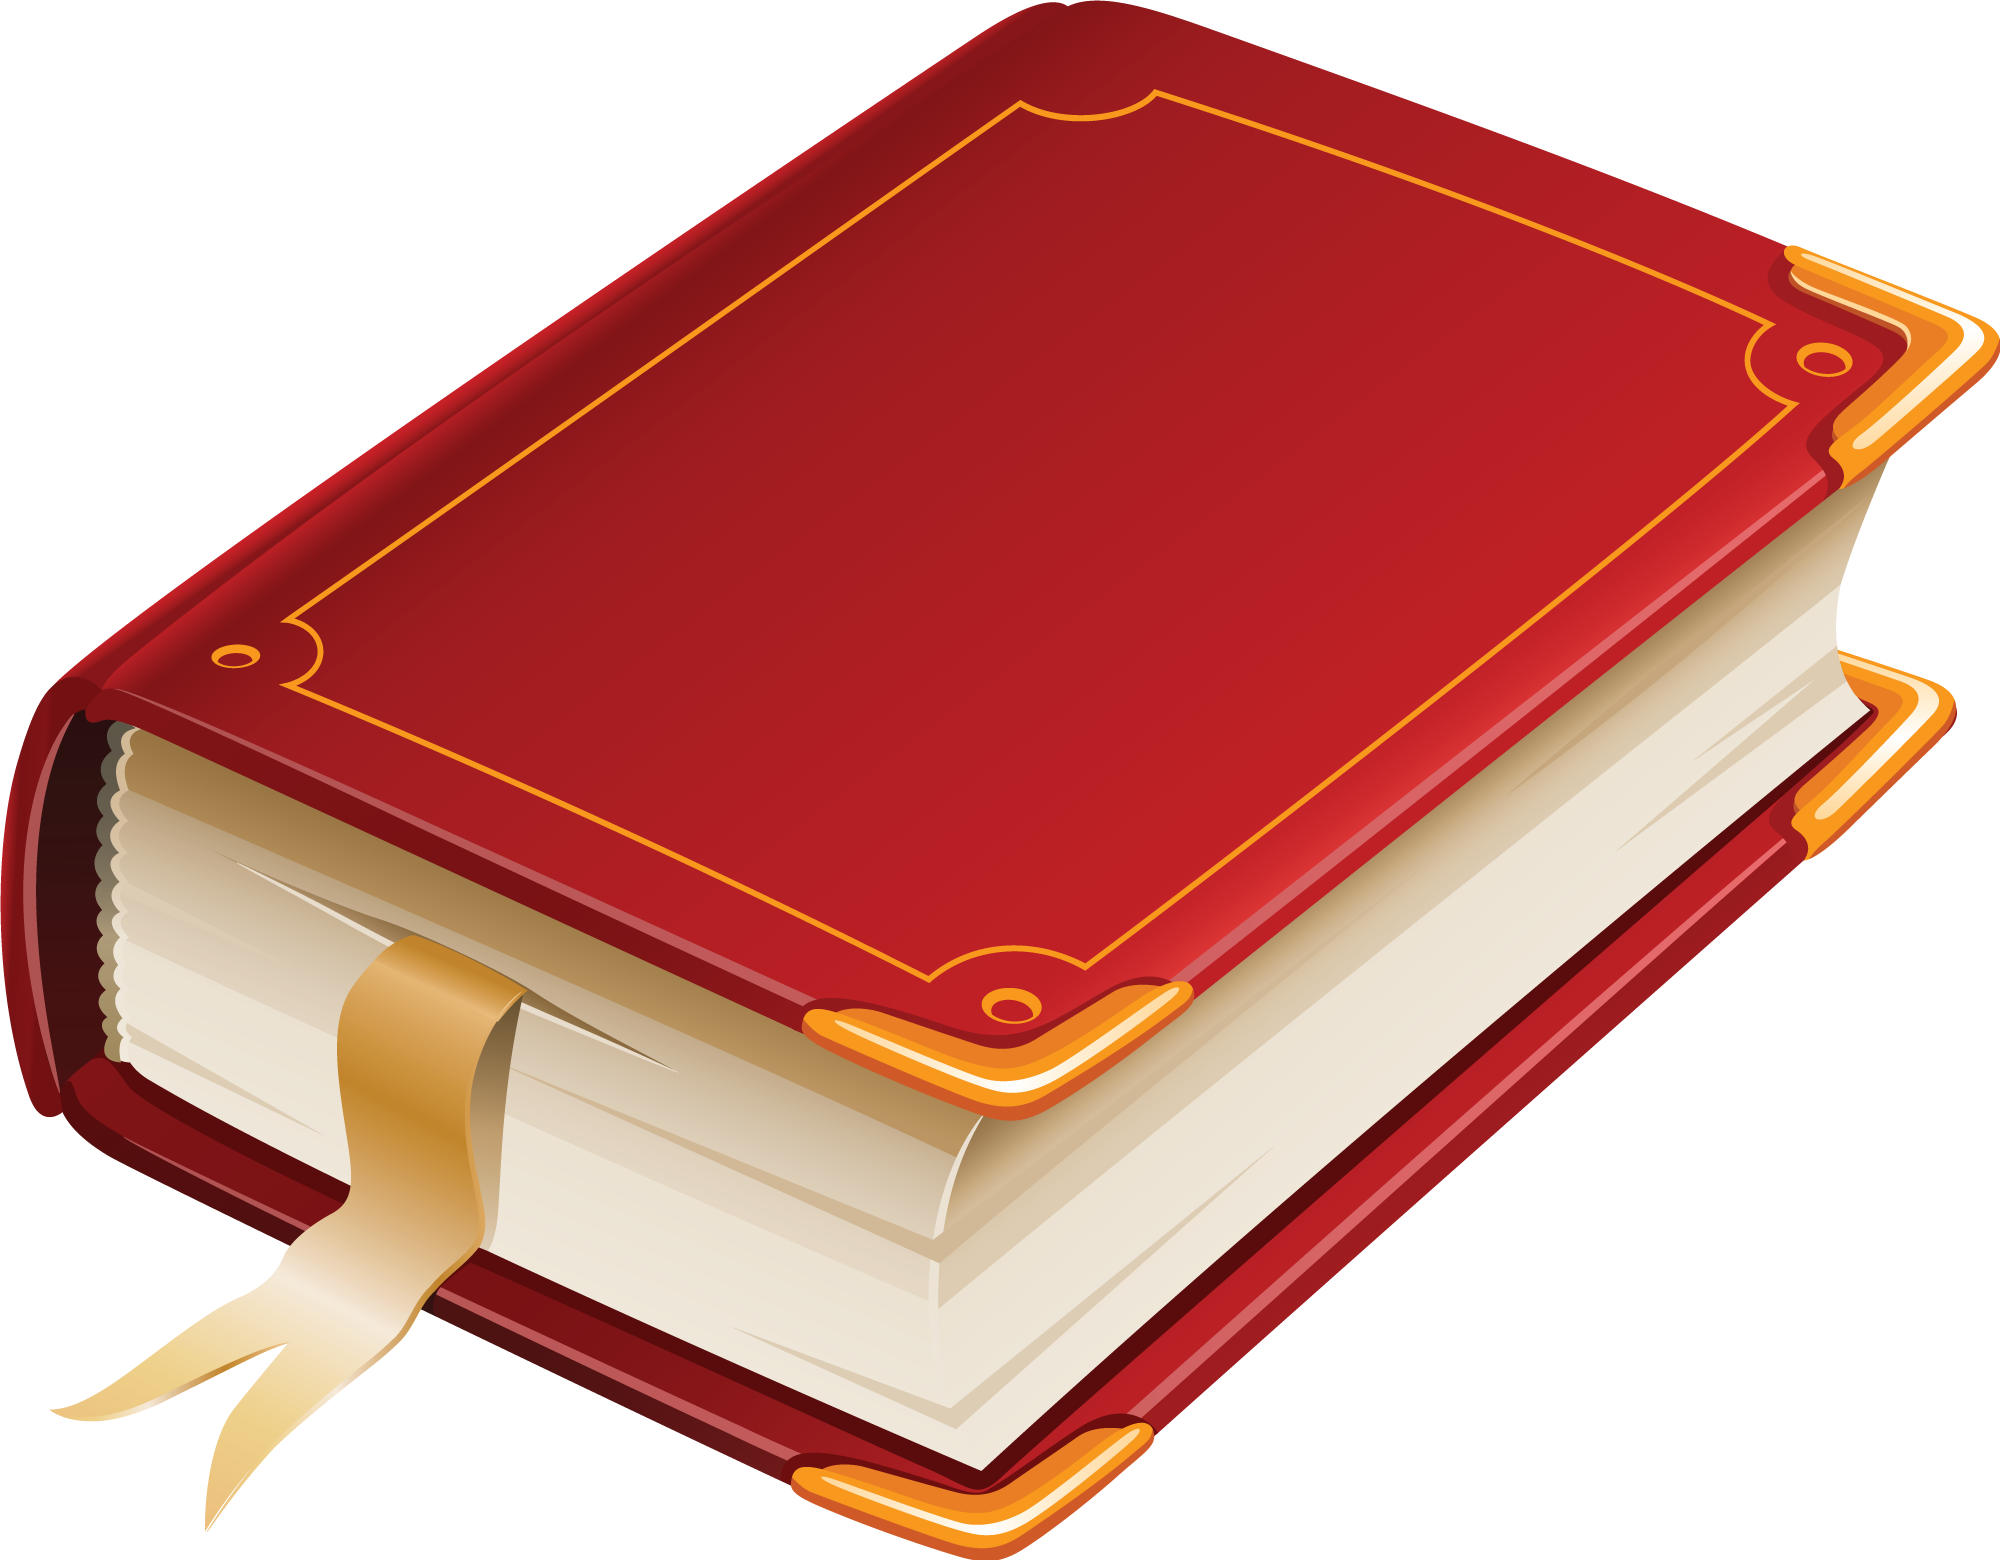 Red book PNG image, free image